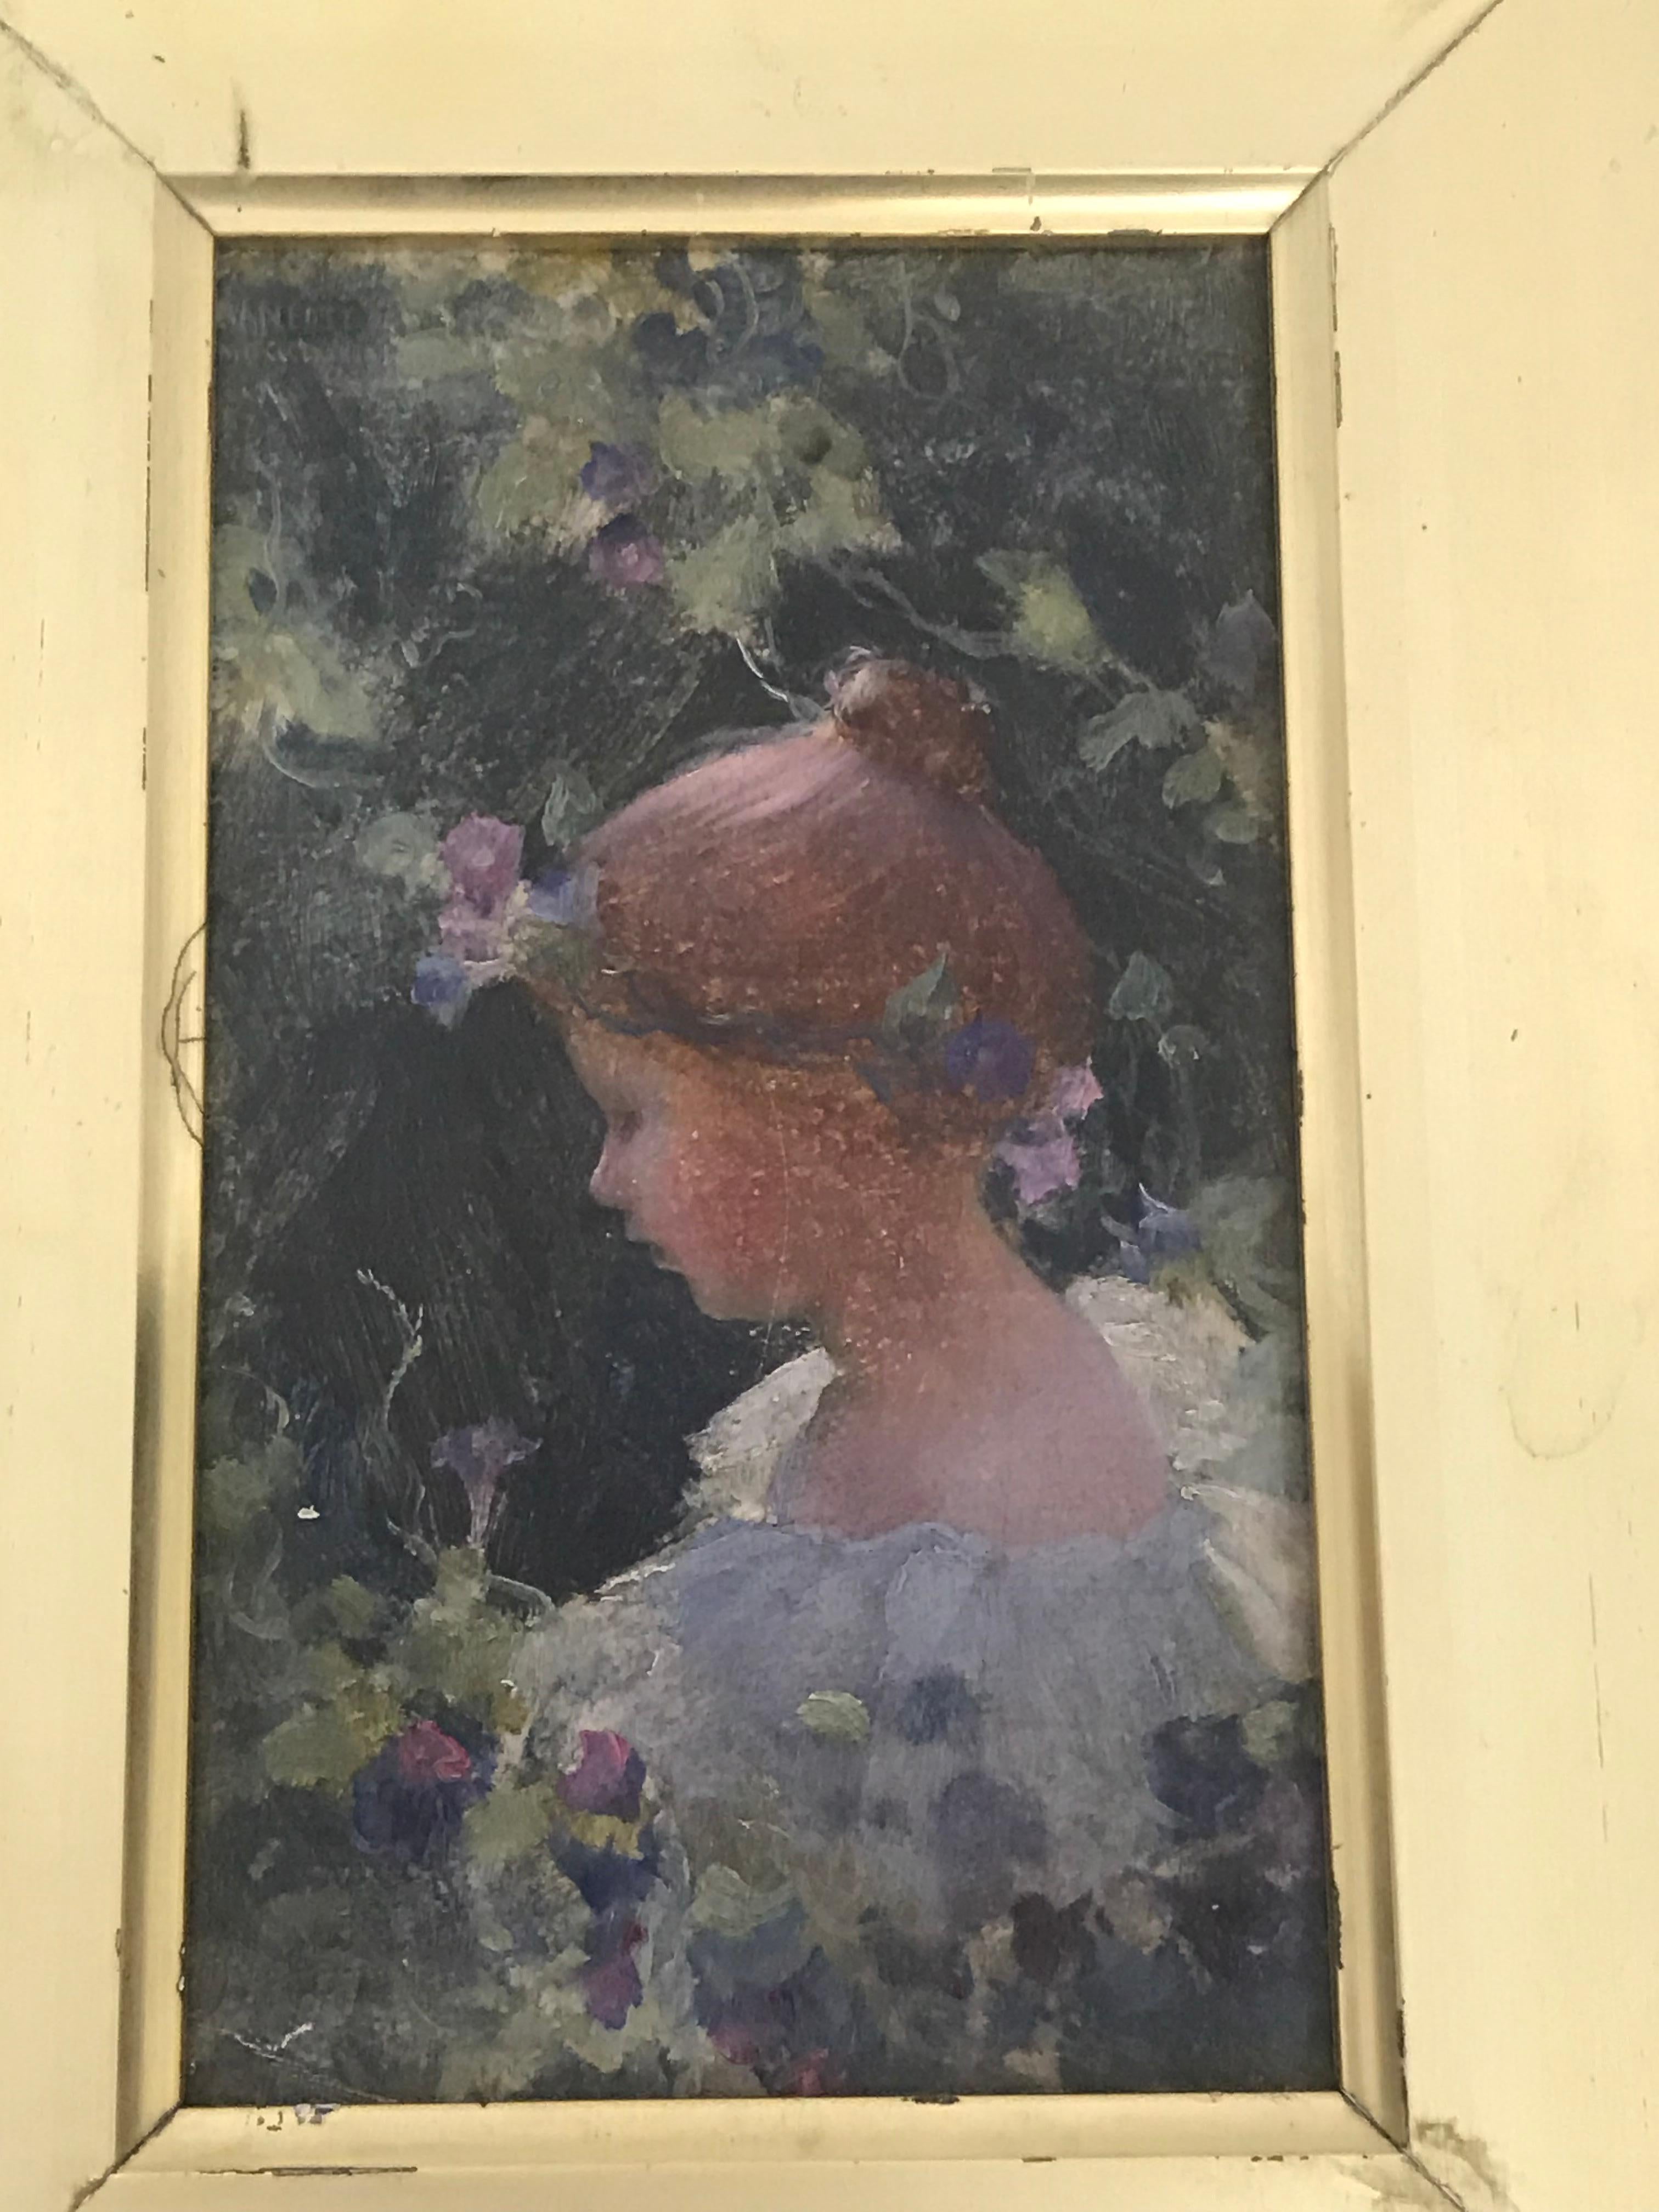 Original oil on artist's board by Charles Courtney Curran (1861-1942). Art Nouveau portrait of his niece Nannette in the garden with up to and flower garland in her hair.

Painting appears to be unsigned. The name Nanette is visible in the upper